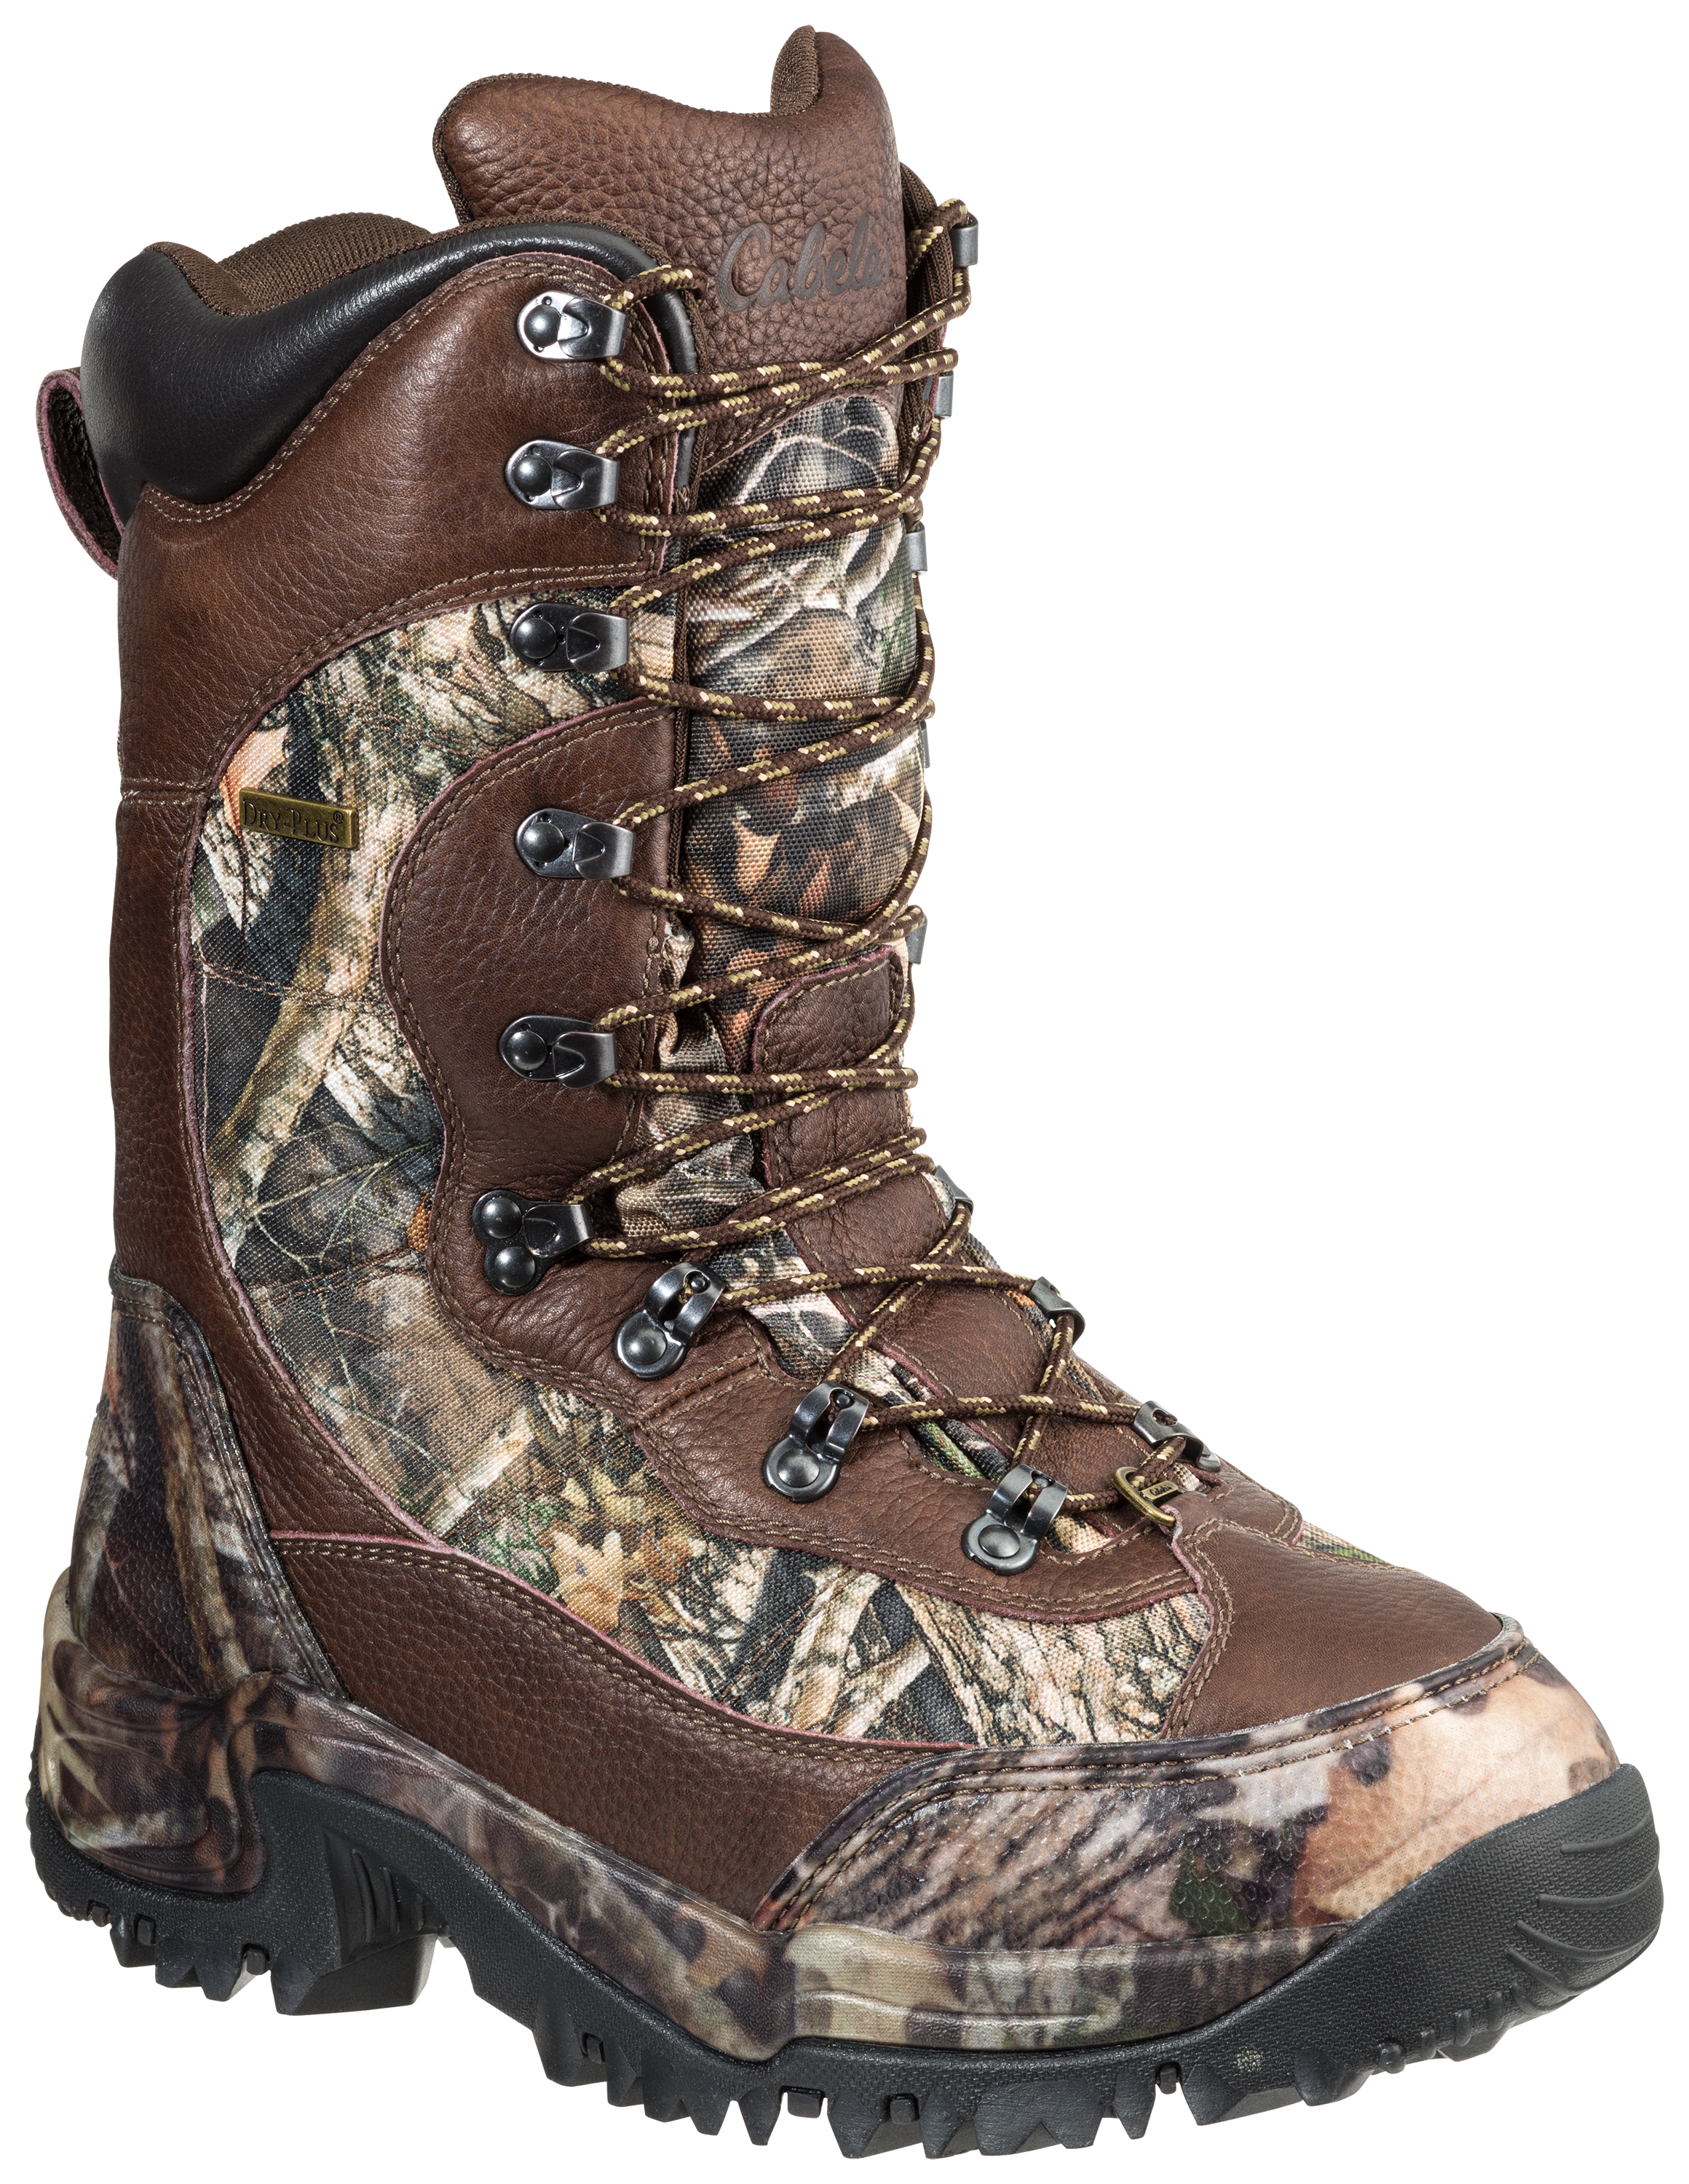 Cabela's Inferno Insulated Waterproof Hunting Boots for Men | Cabela's